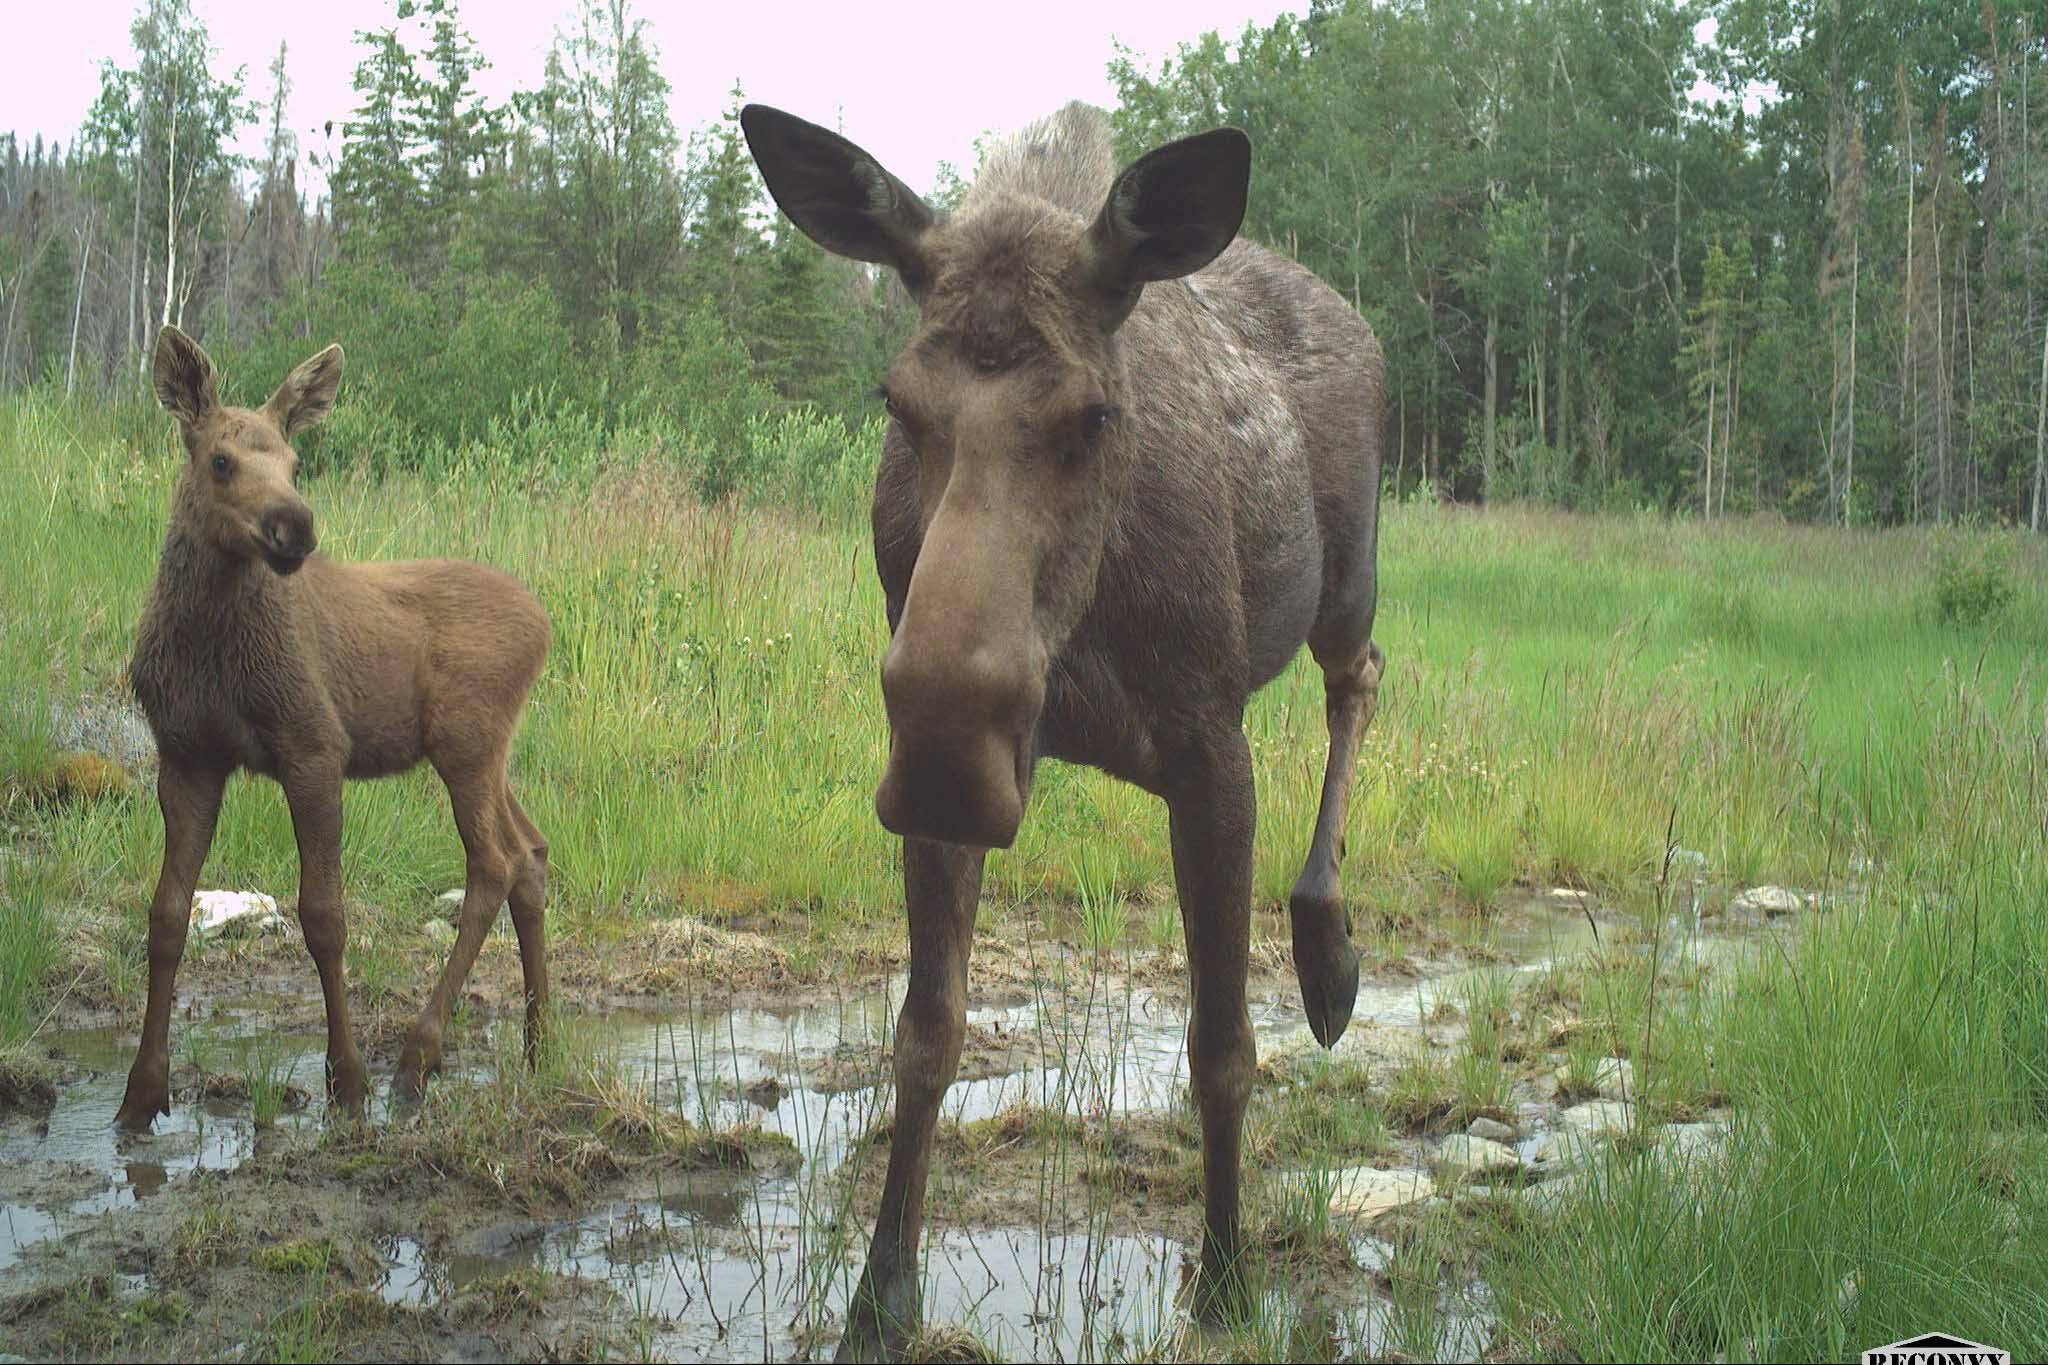 A moose cow and calf walking toward a wildlife crossing structure. (Photo by C. Canterbury/USFWS)